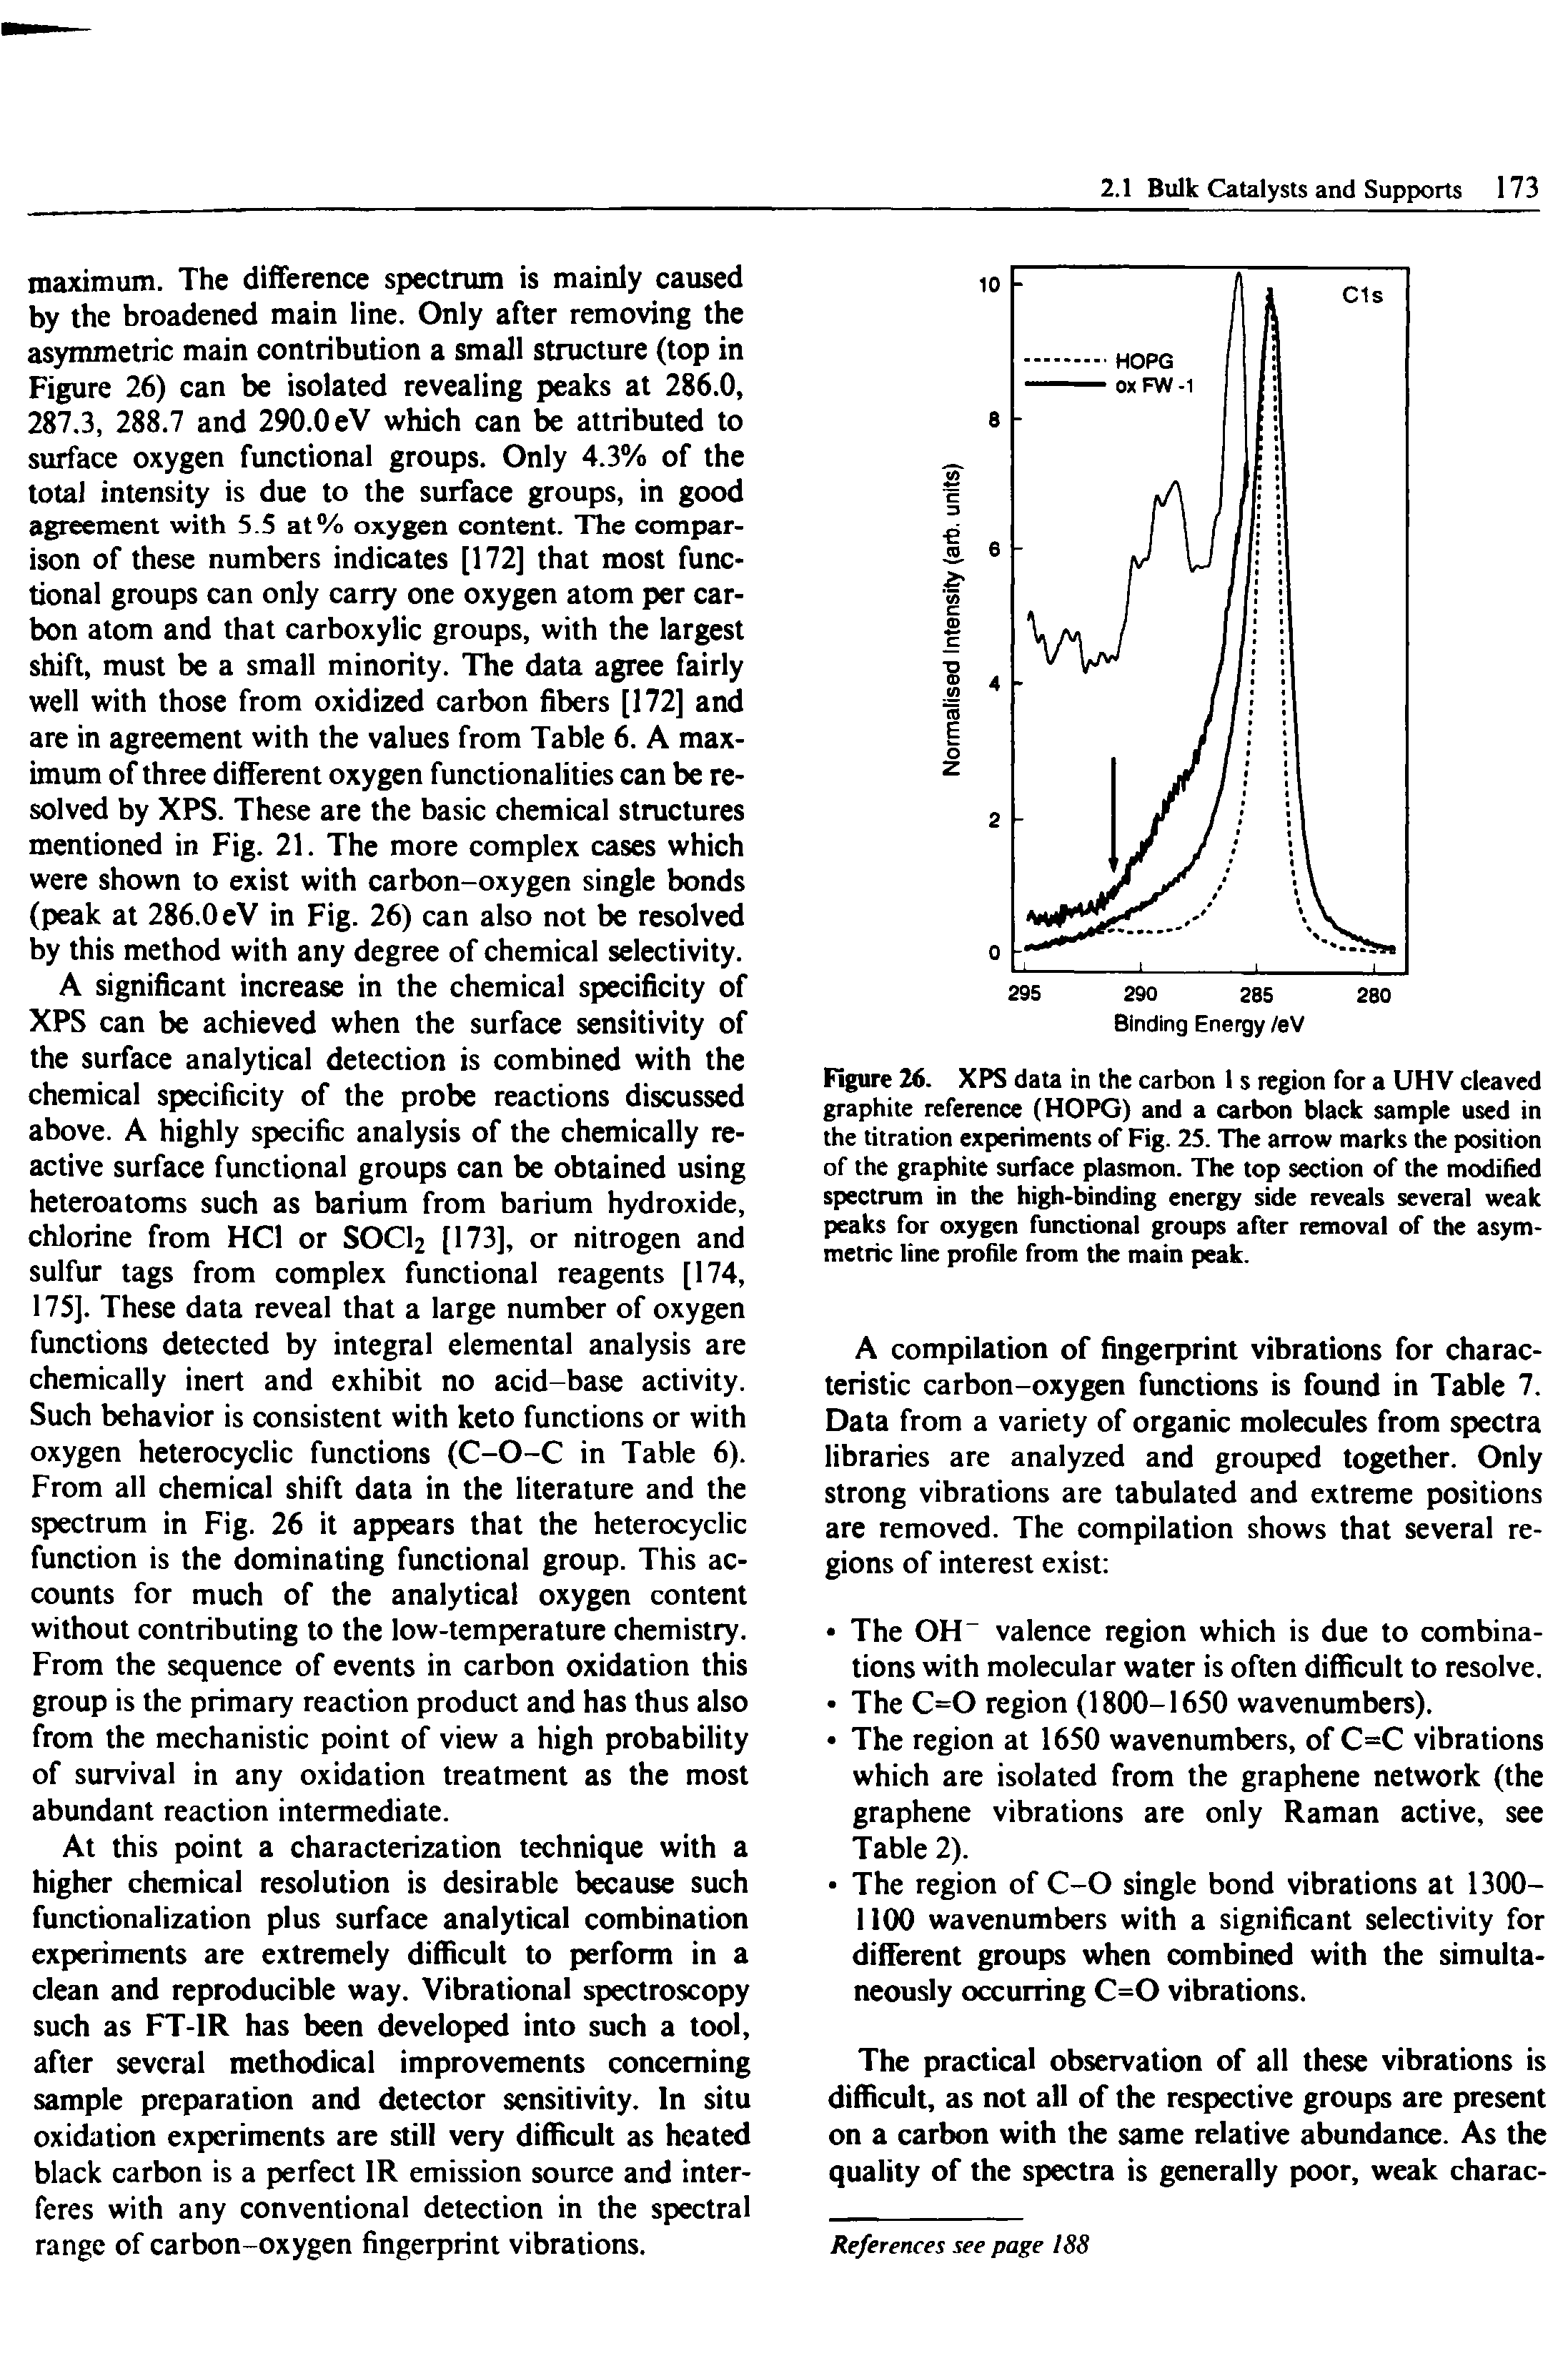 Figure 26. XPS data in the carbon 1 s region for a UHV cleaved graphite reference (HOPG) and a carbon black sample used in the titration experiments of Fig. 25. The arrow marks the position of the graphite surface plasmon. The top section of the modified spectrum in the high-binding energy side reveals several weak peaks for oxygen functional groups after removal of the asymmetric line profile from the main peak.